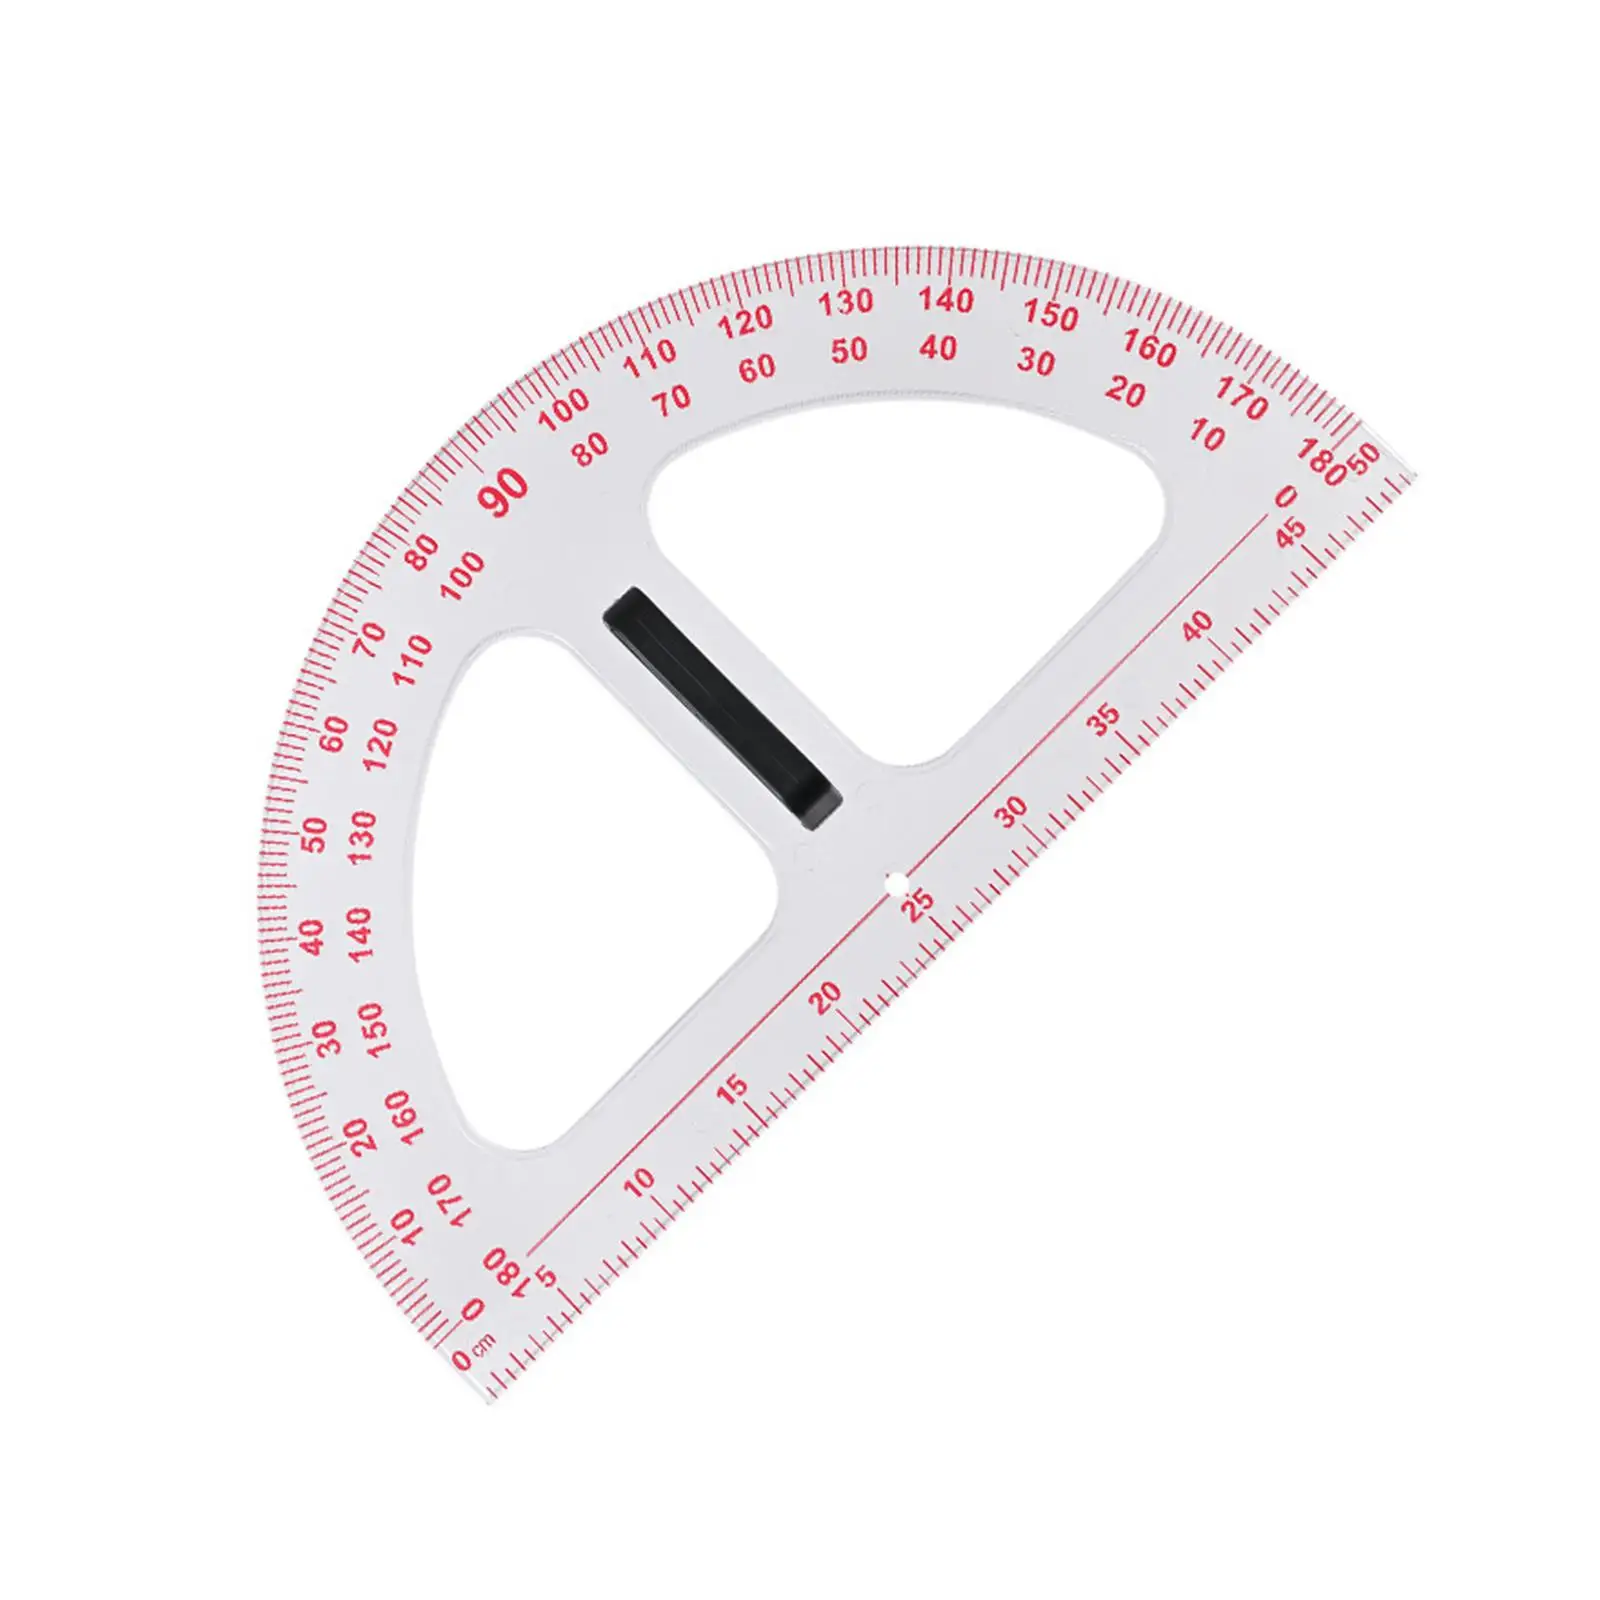 Math Protractor with Removable Handle Measuring Tool 180 Degrees Geometry Math Semi Circular Protractor for Drafting Woodworking